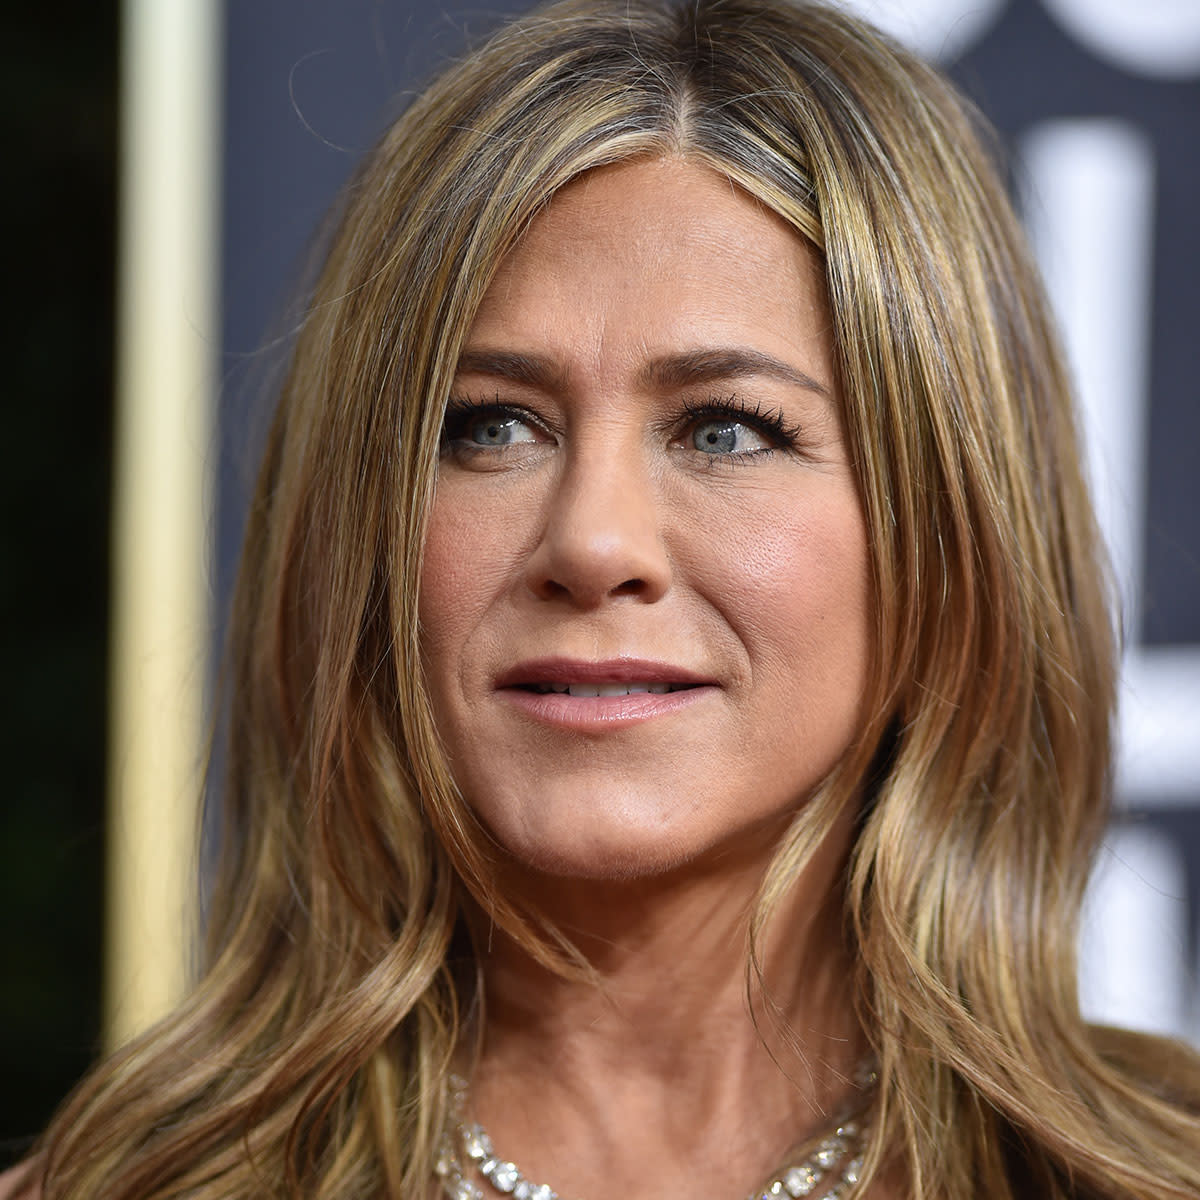 Jennifer Aniston at the 77th Annual Golden Globes Awards